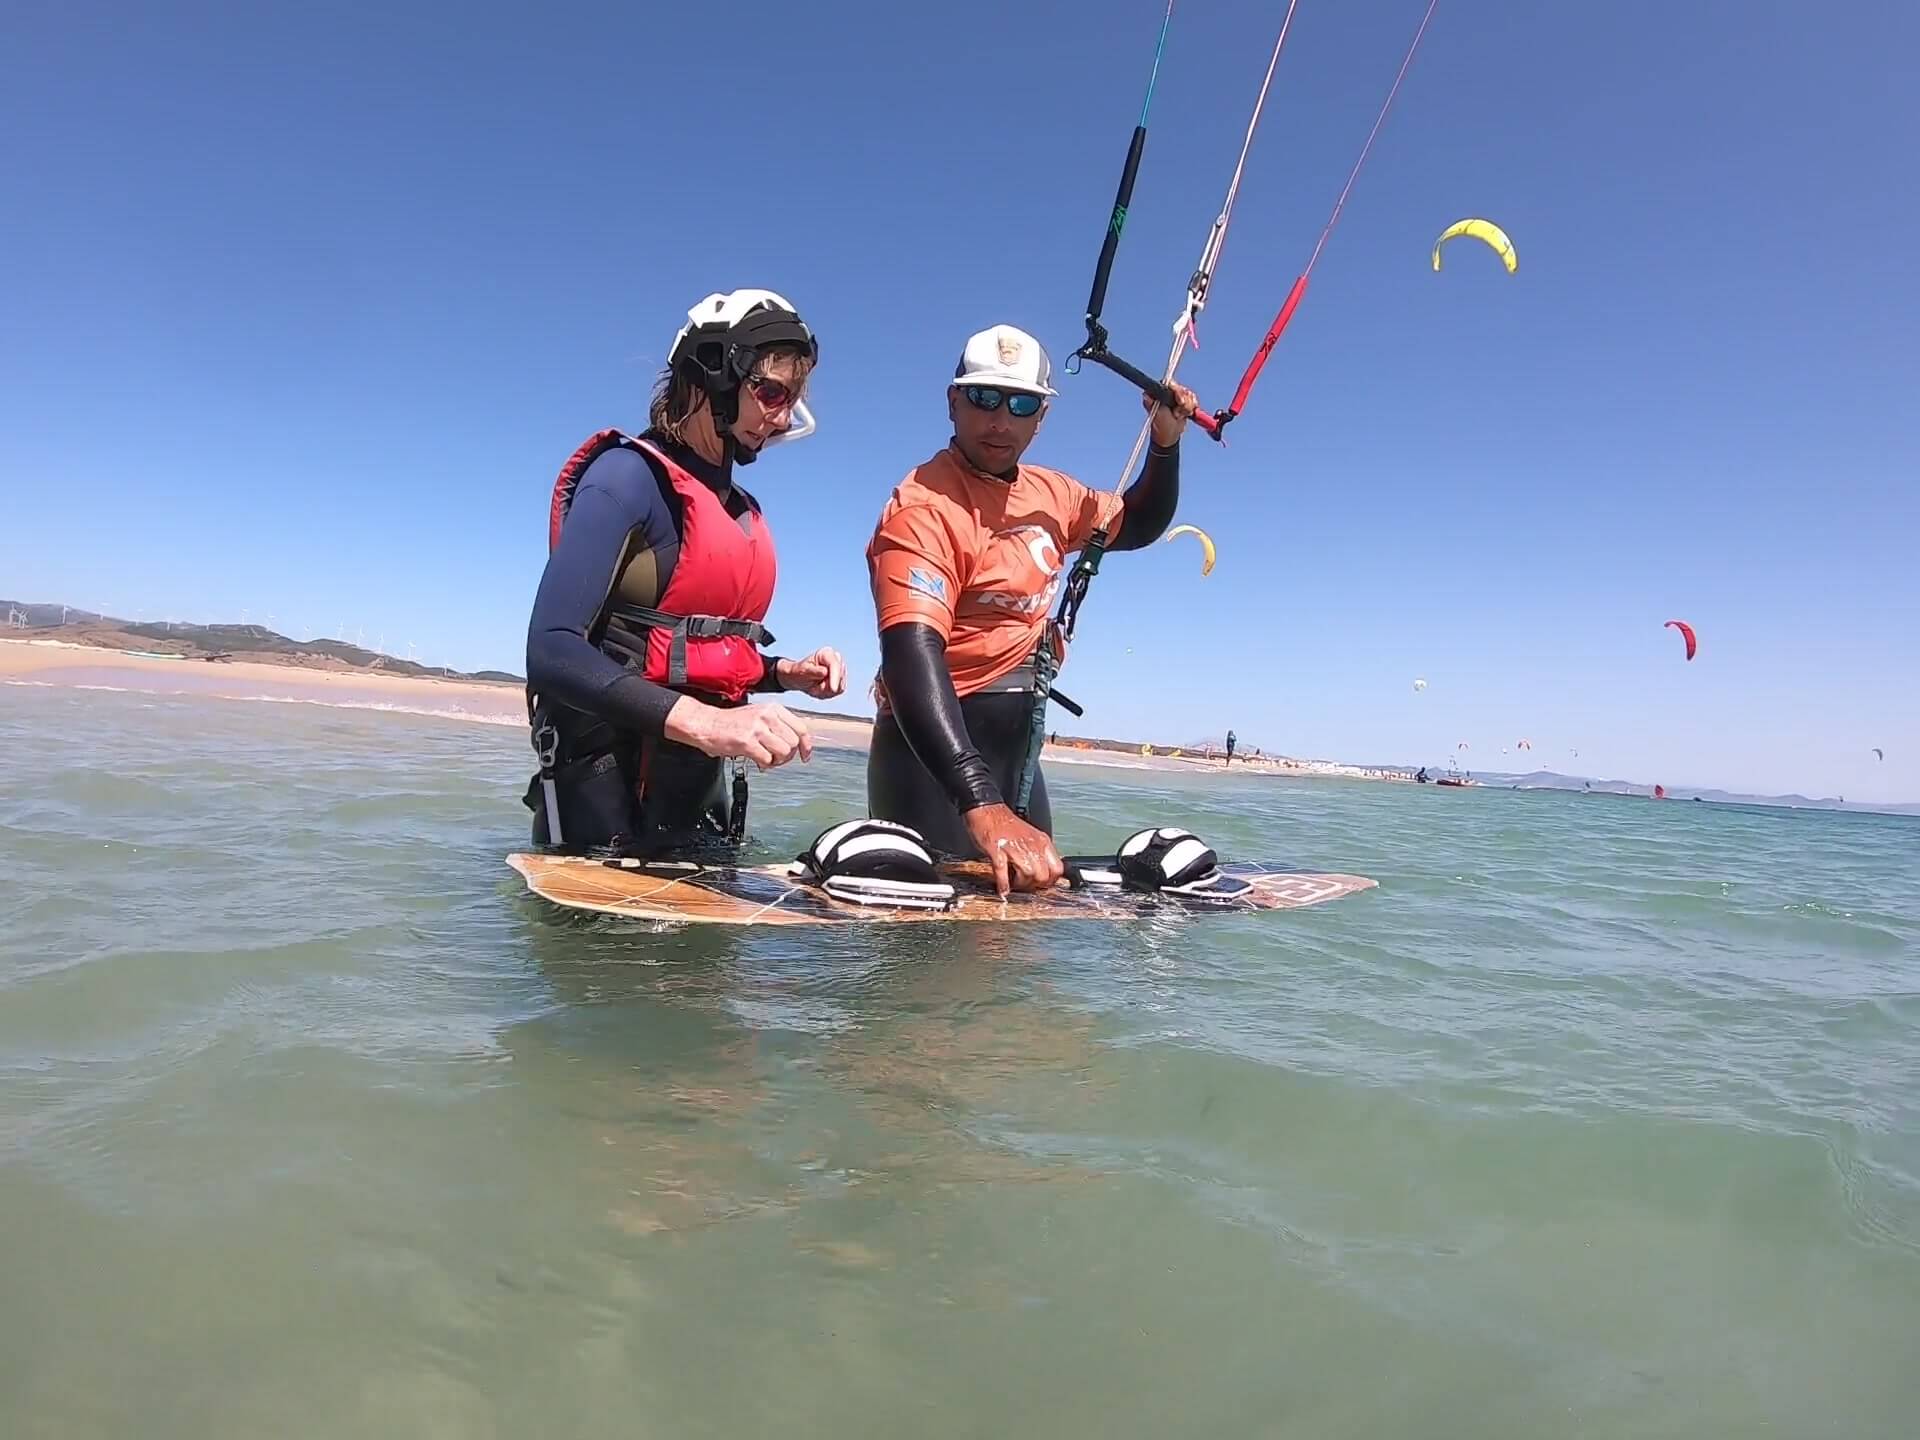 How long does it take to learn how to kitesurf?